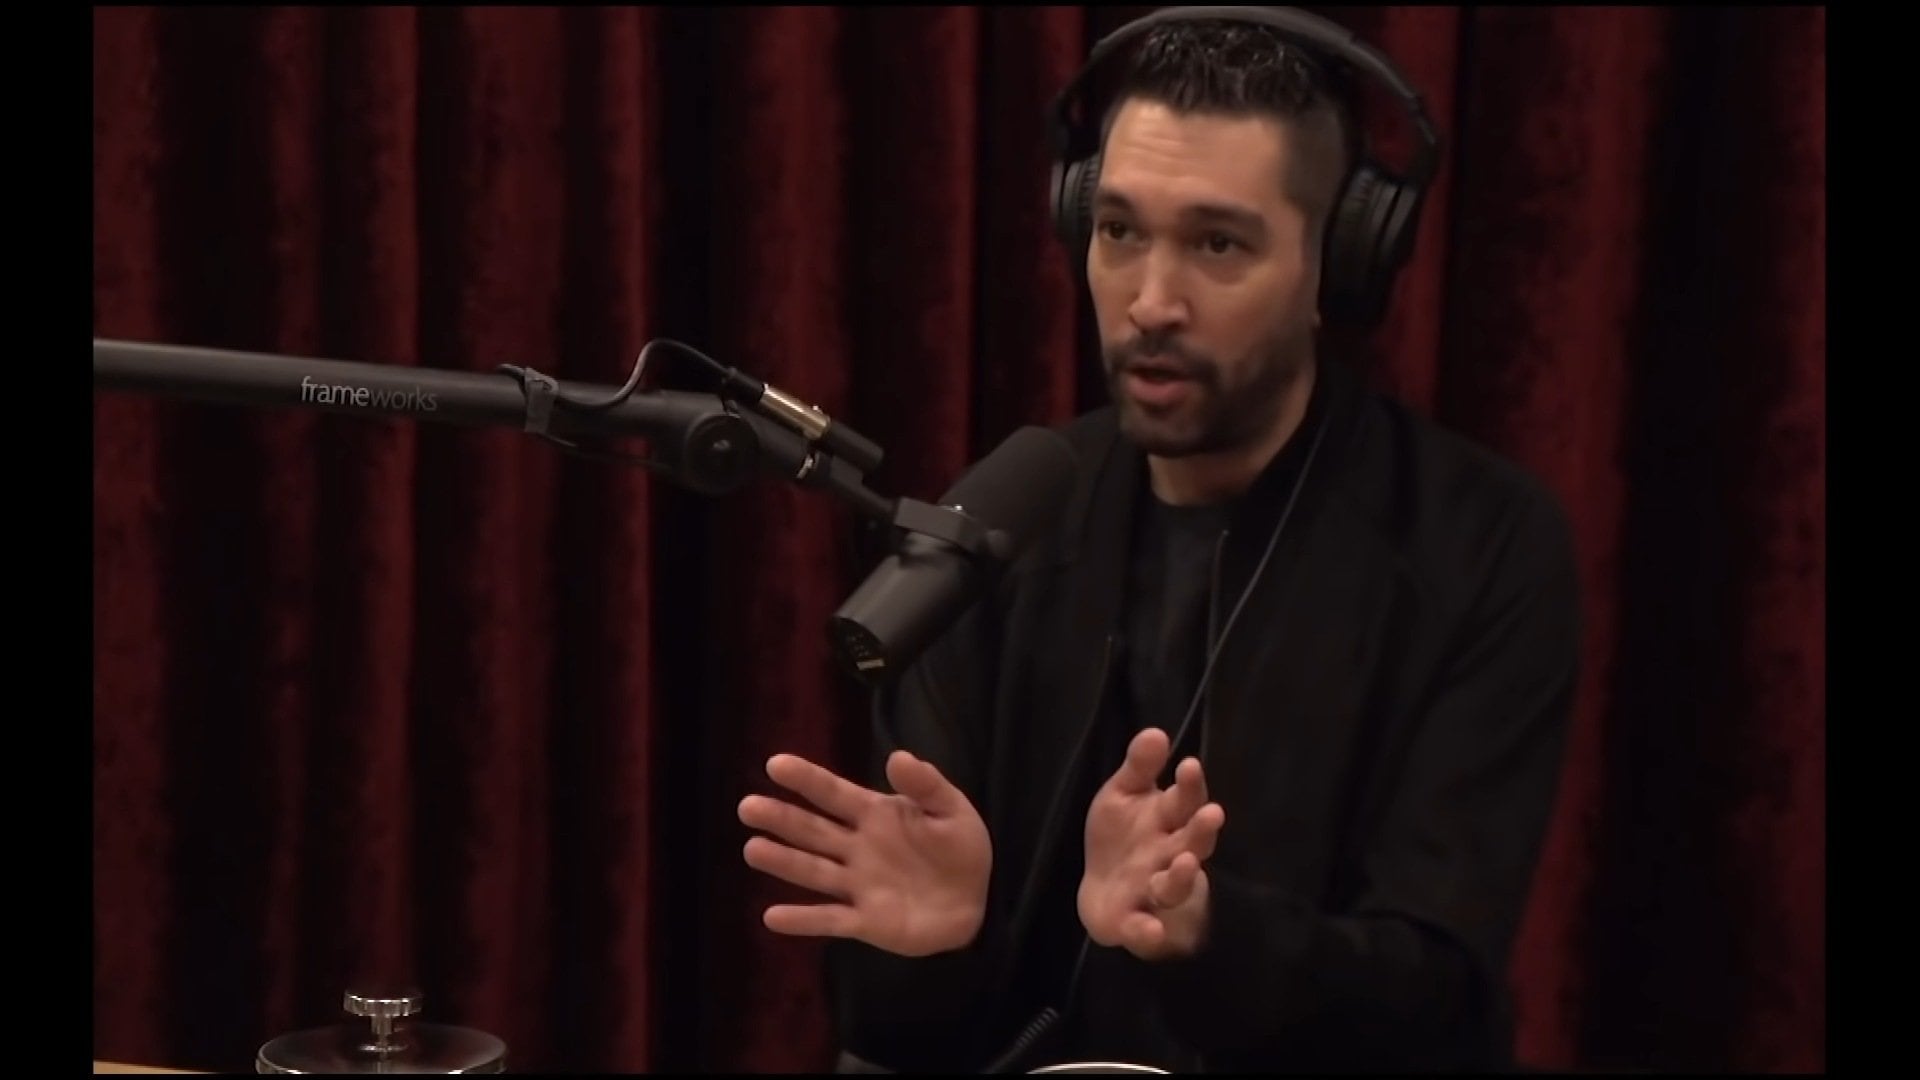 Dave Smith, comedian, podcaster at The Joe Rogan Experience podcast. Image credit: YouTube